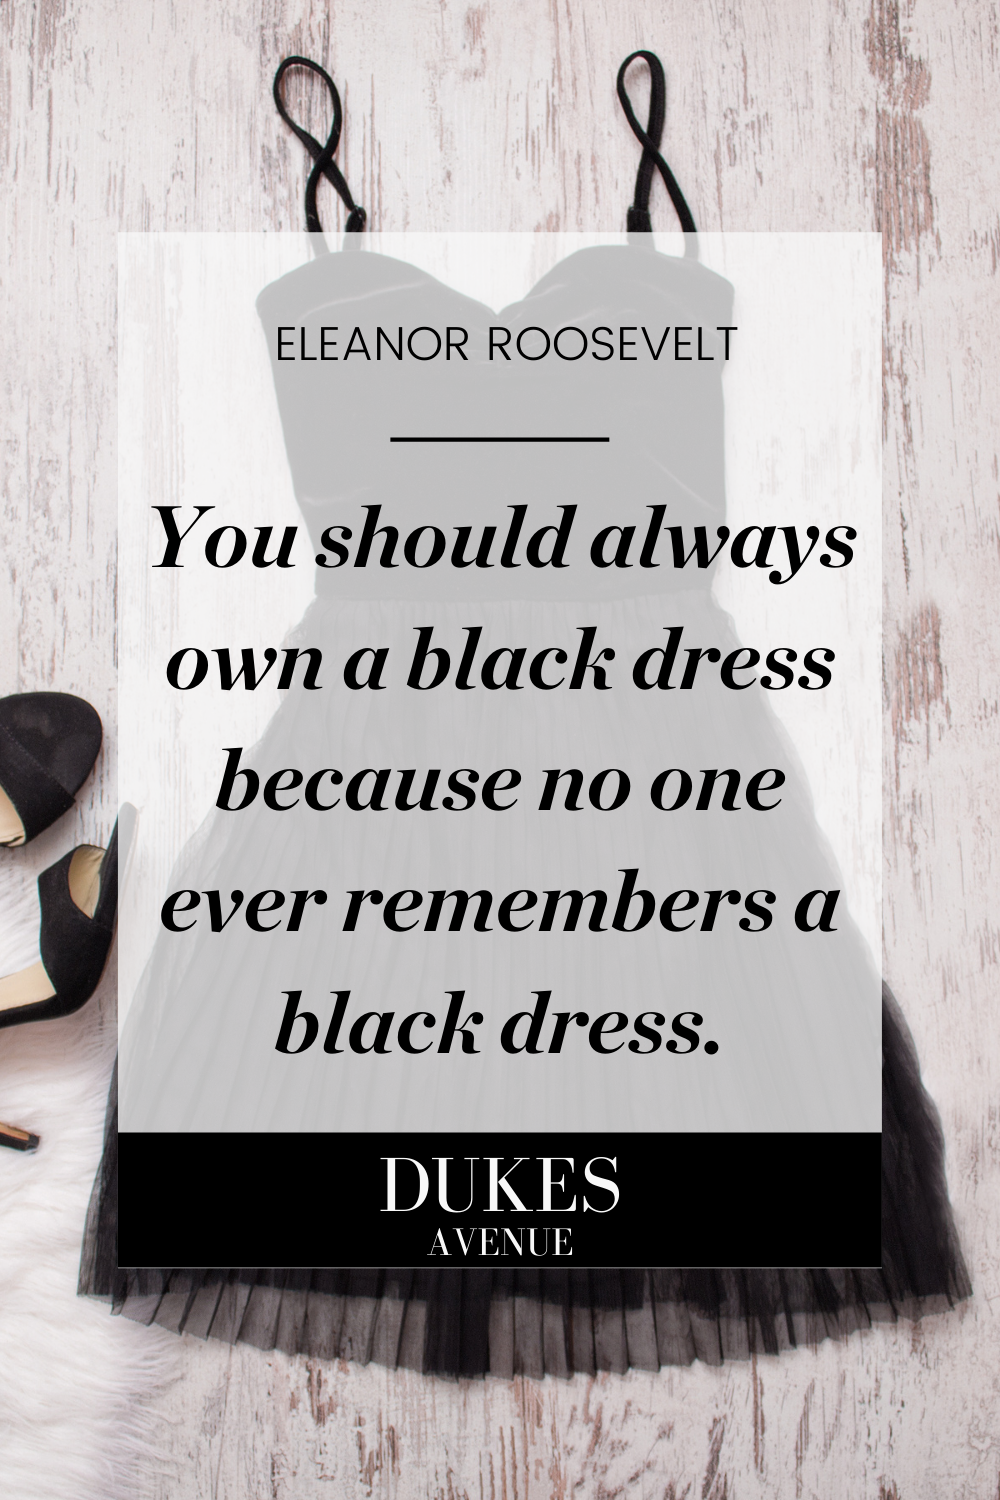 Black dress flatlay on a wooden board with an Eleanor Roosevelt black dress quote as text overlay. 